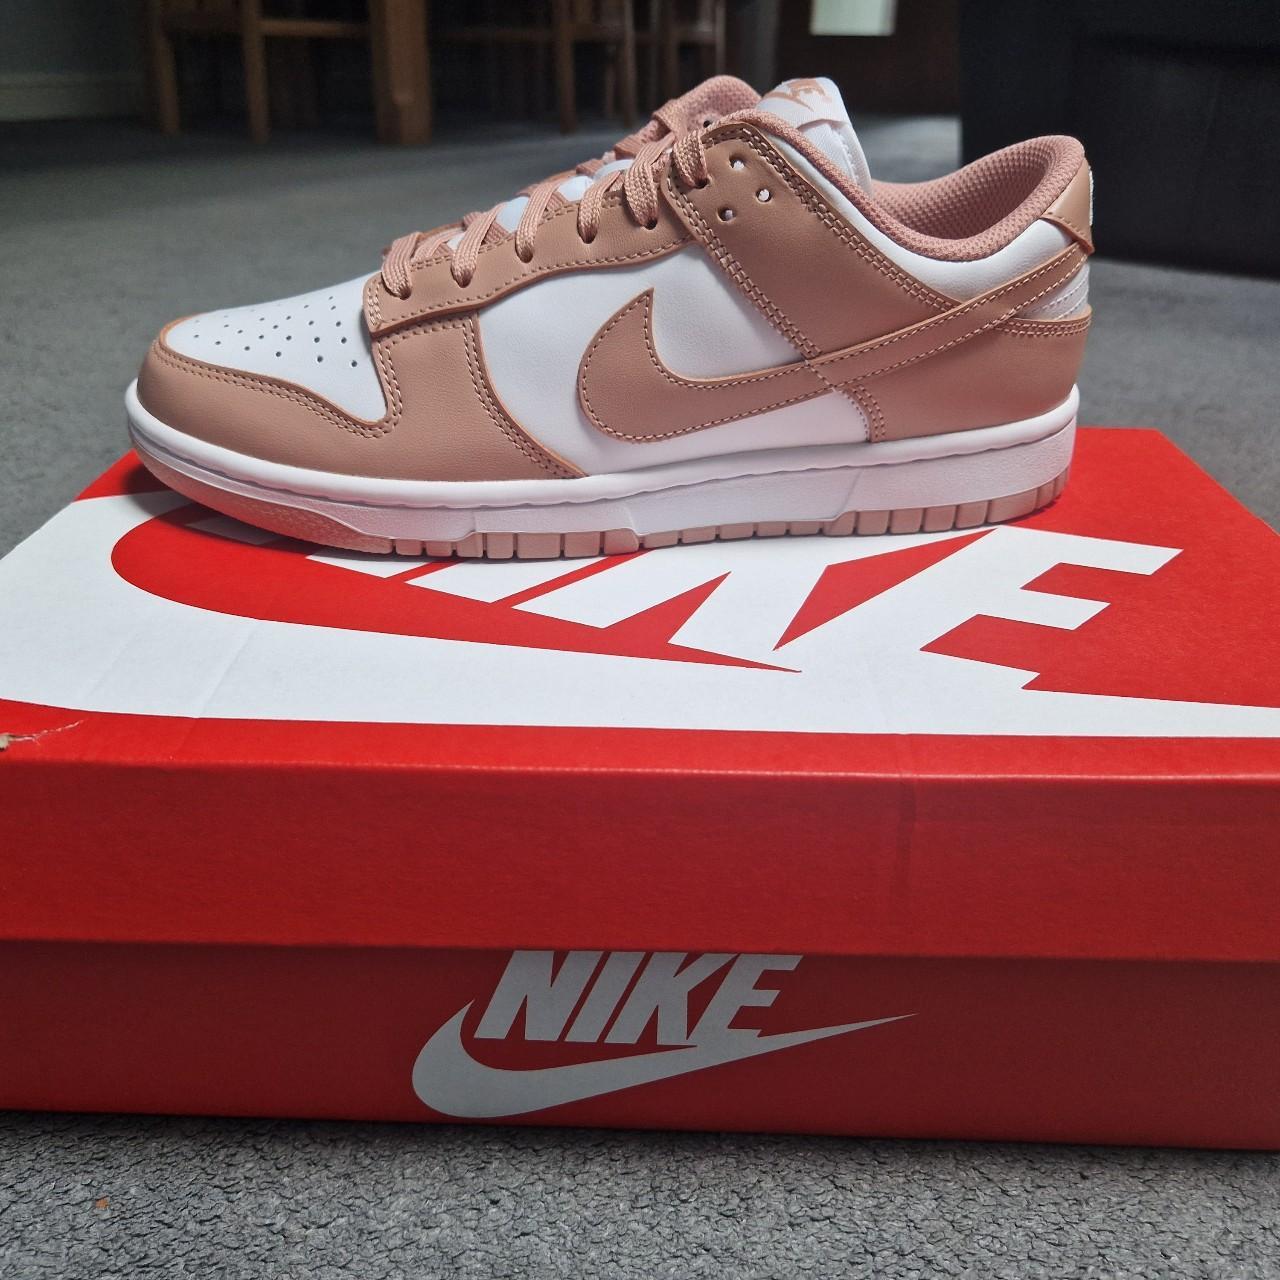 Nike Women's White and Pink Trainers | Depop